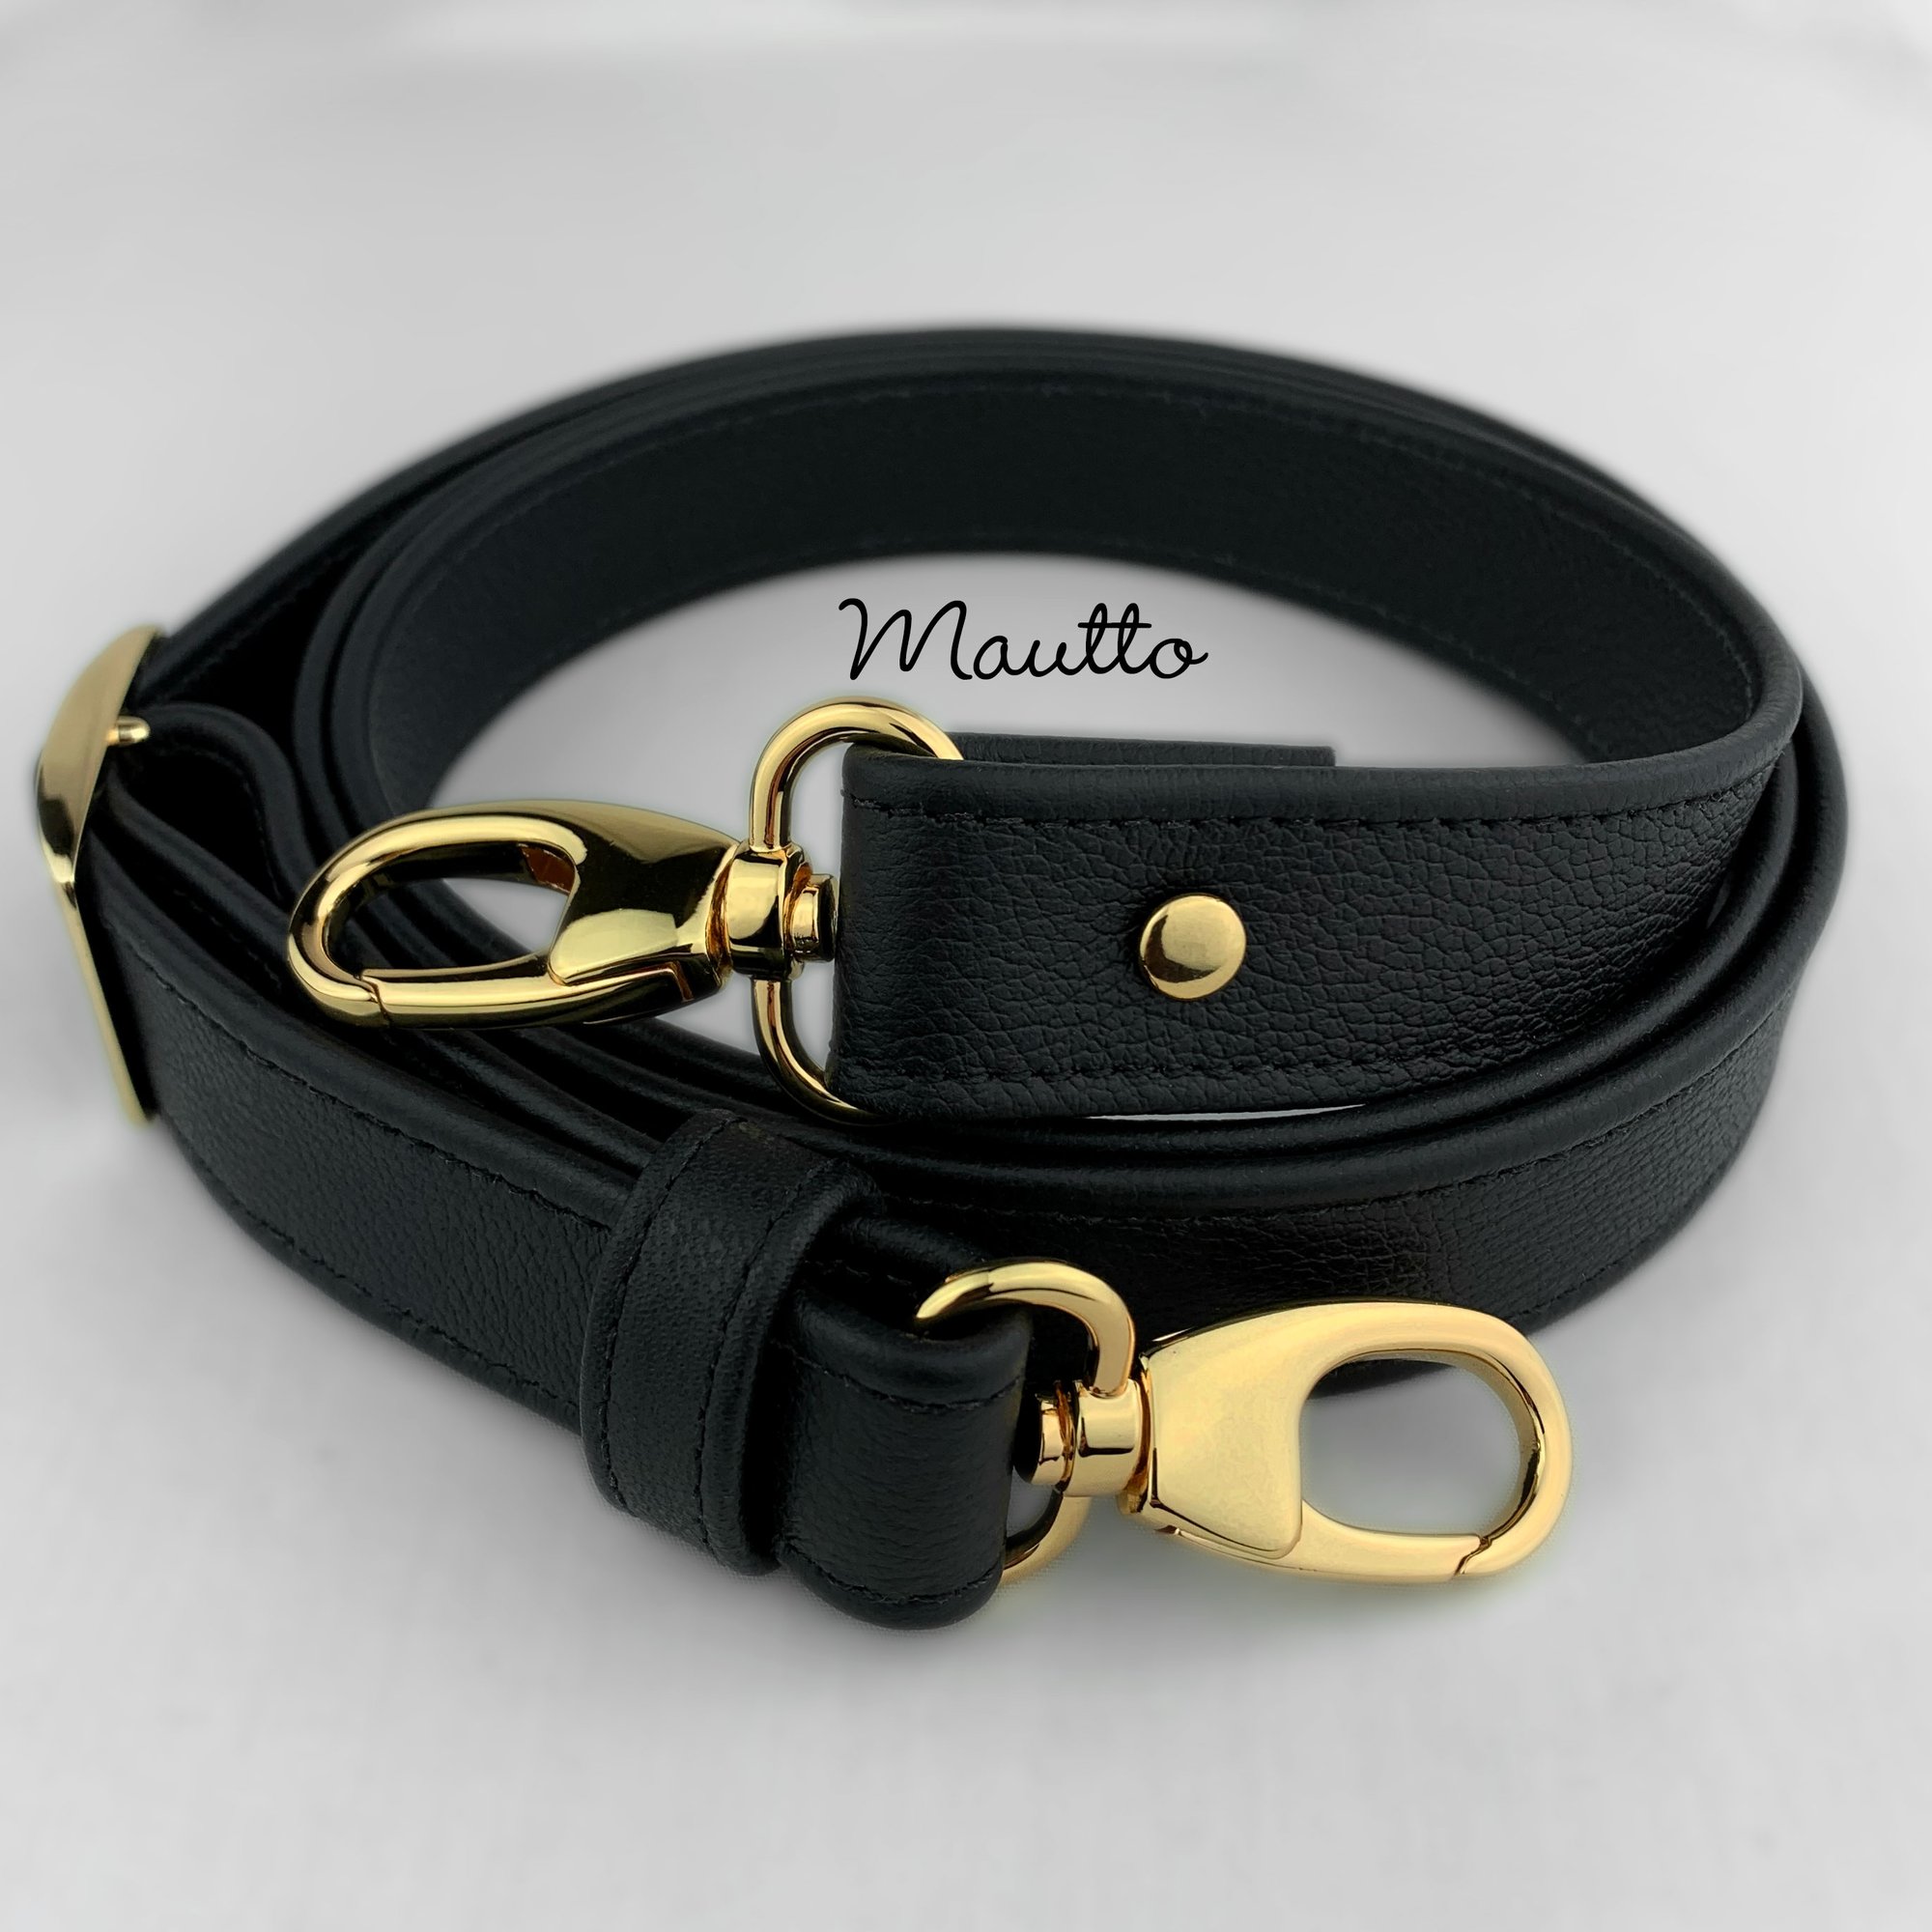 Adjustable Straps for Bags of All Shapes & Sizes – Mautto